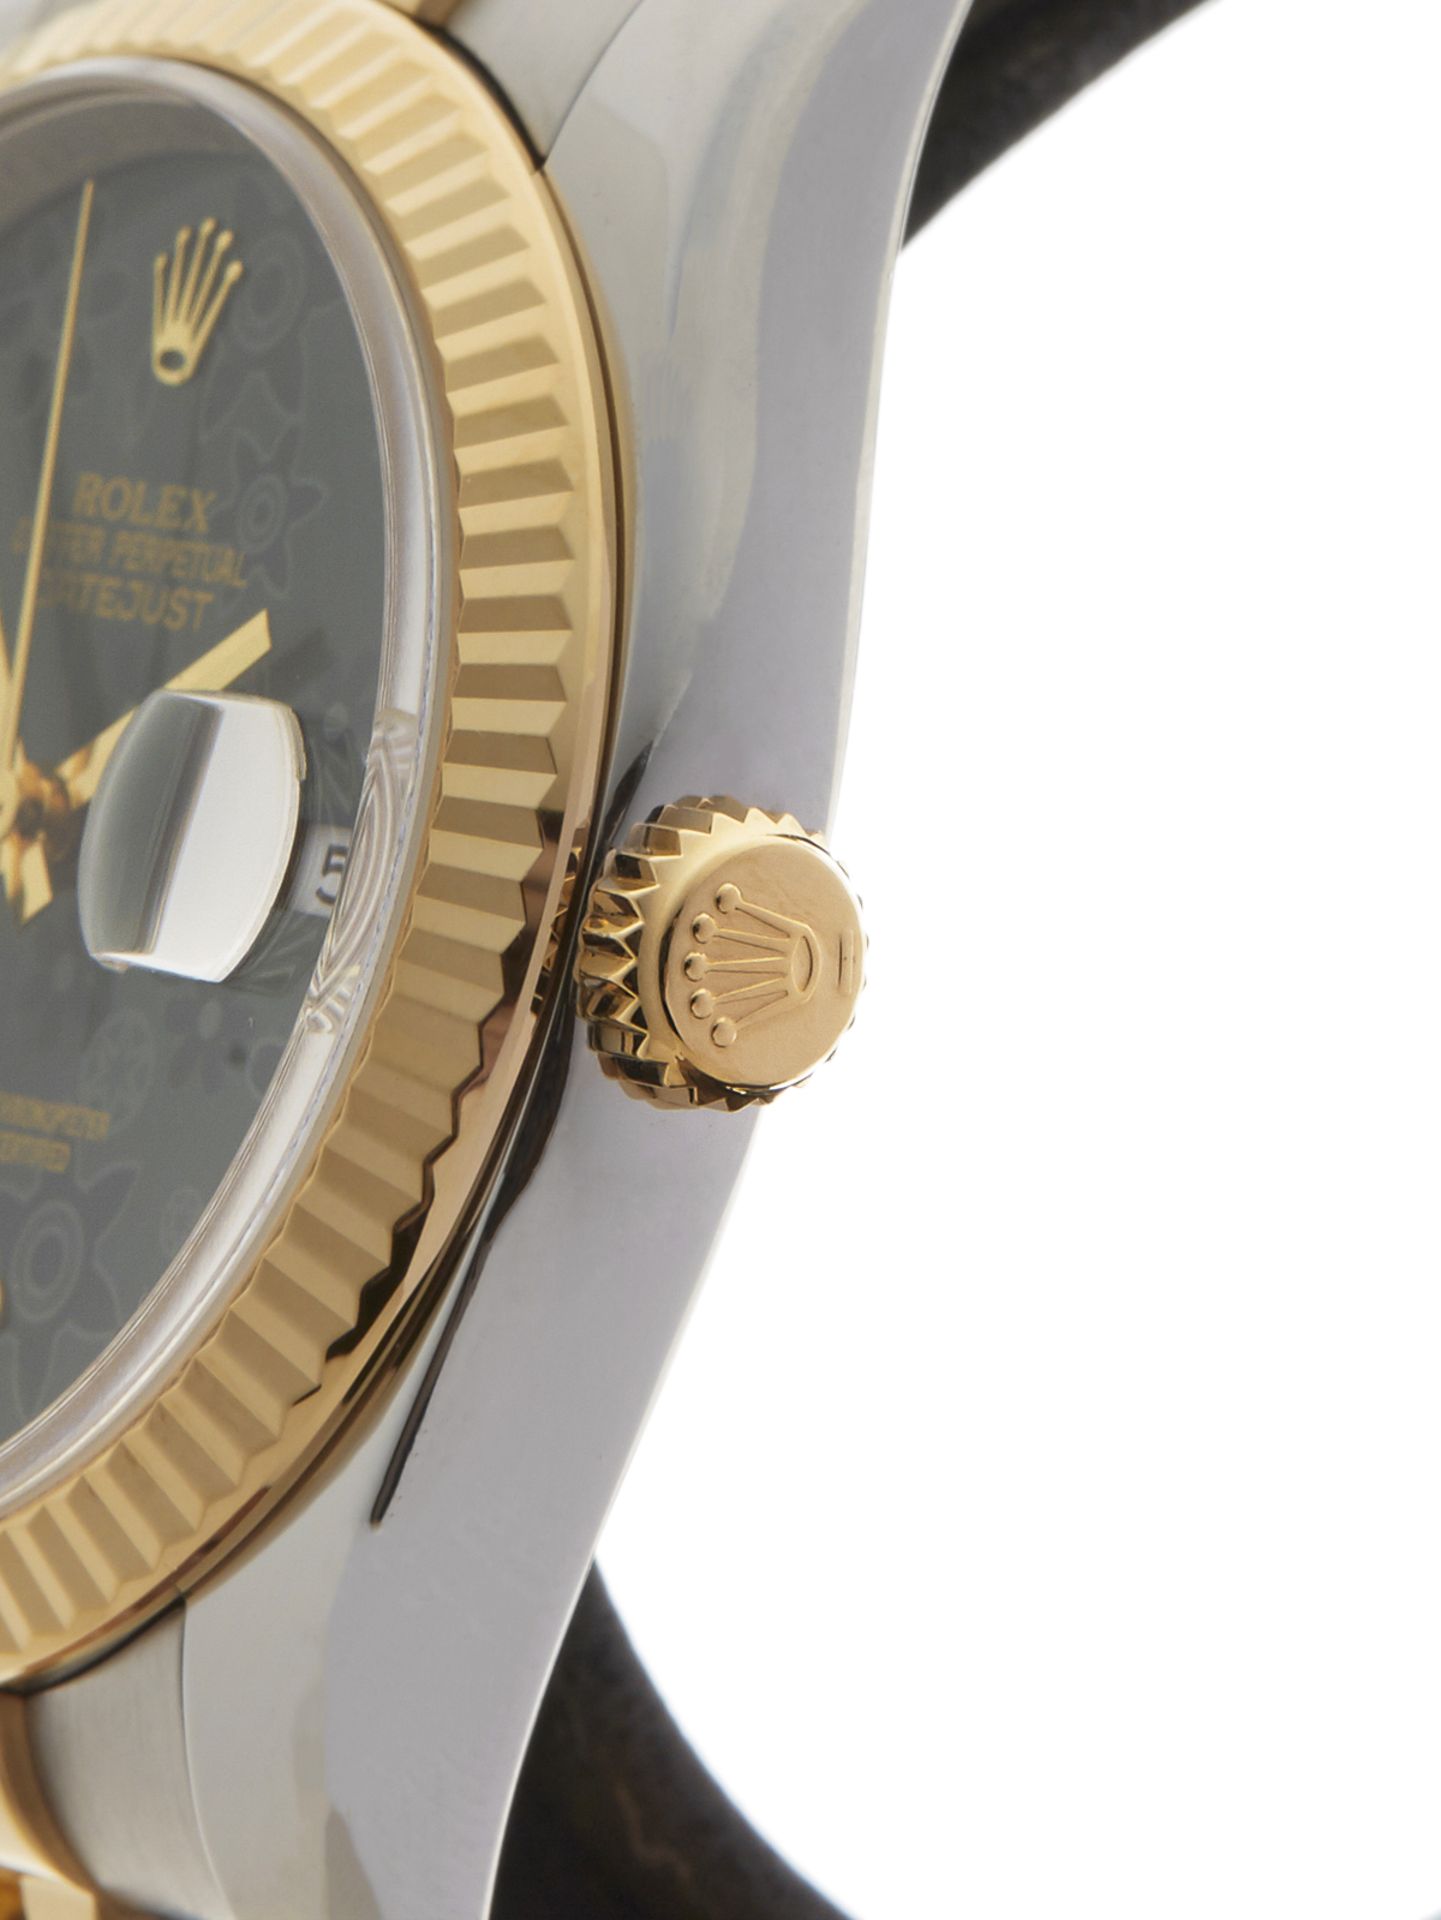 Rolex Datejust 36mm Stainless Steel & 18k Yellow Gold 116233 - Image 4 of 9